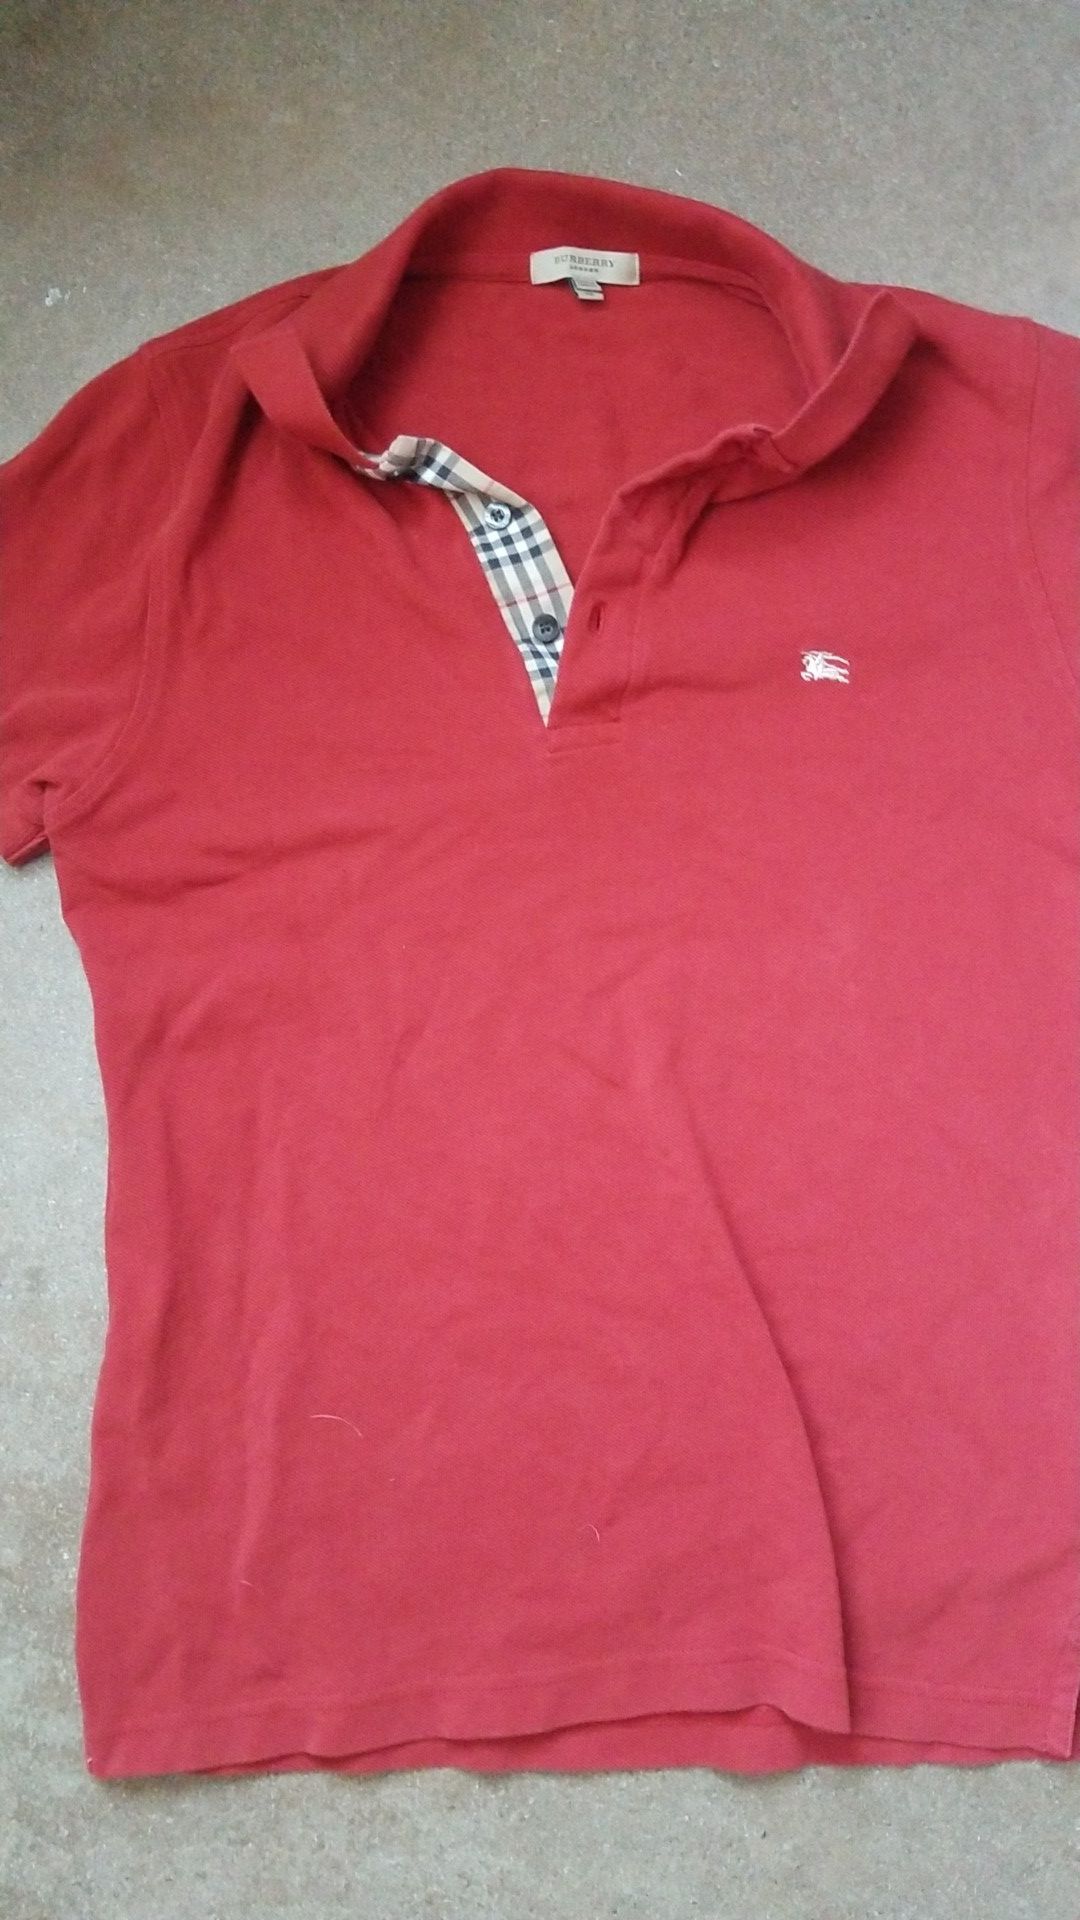 Authentic BURBERRY LONDON polo Red size M